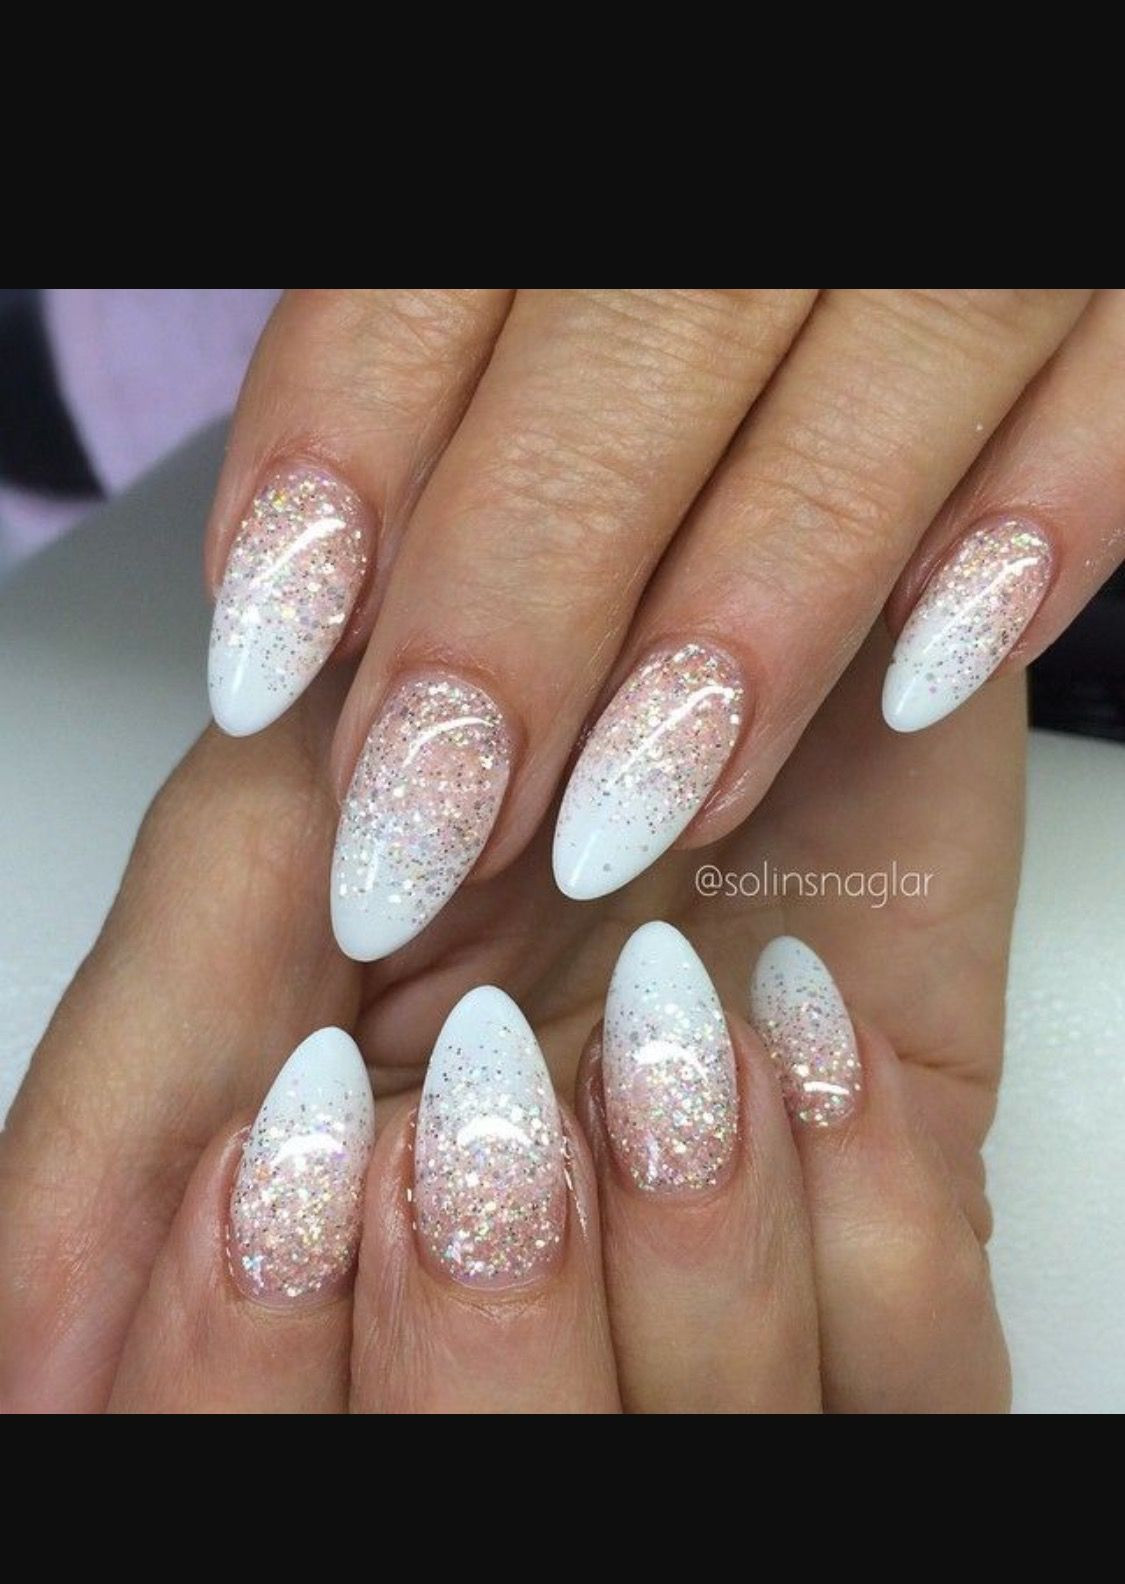 Almond Glitter Nails
 Pin by Elizabeth C on Nails